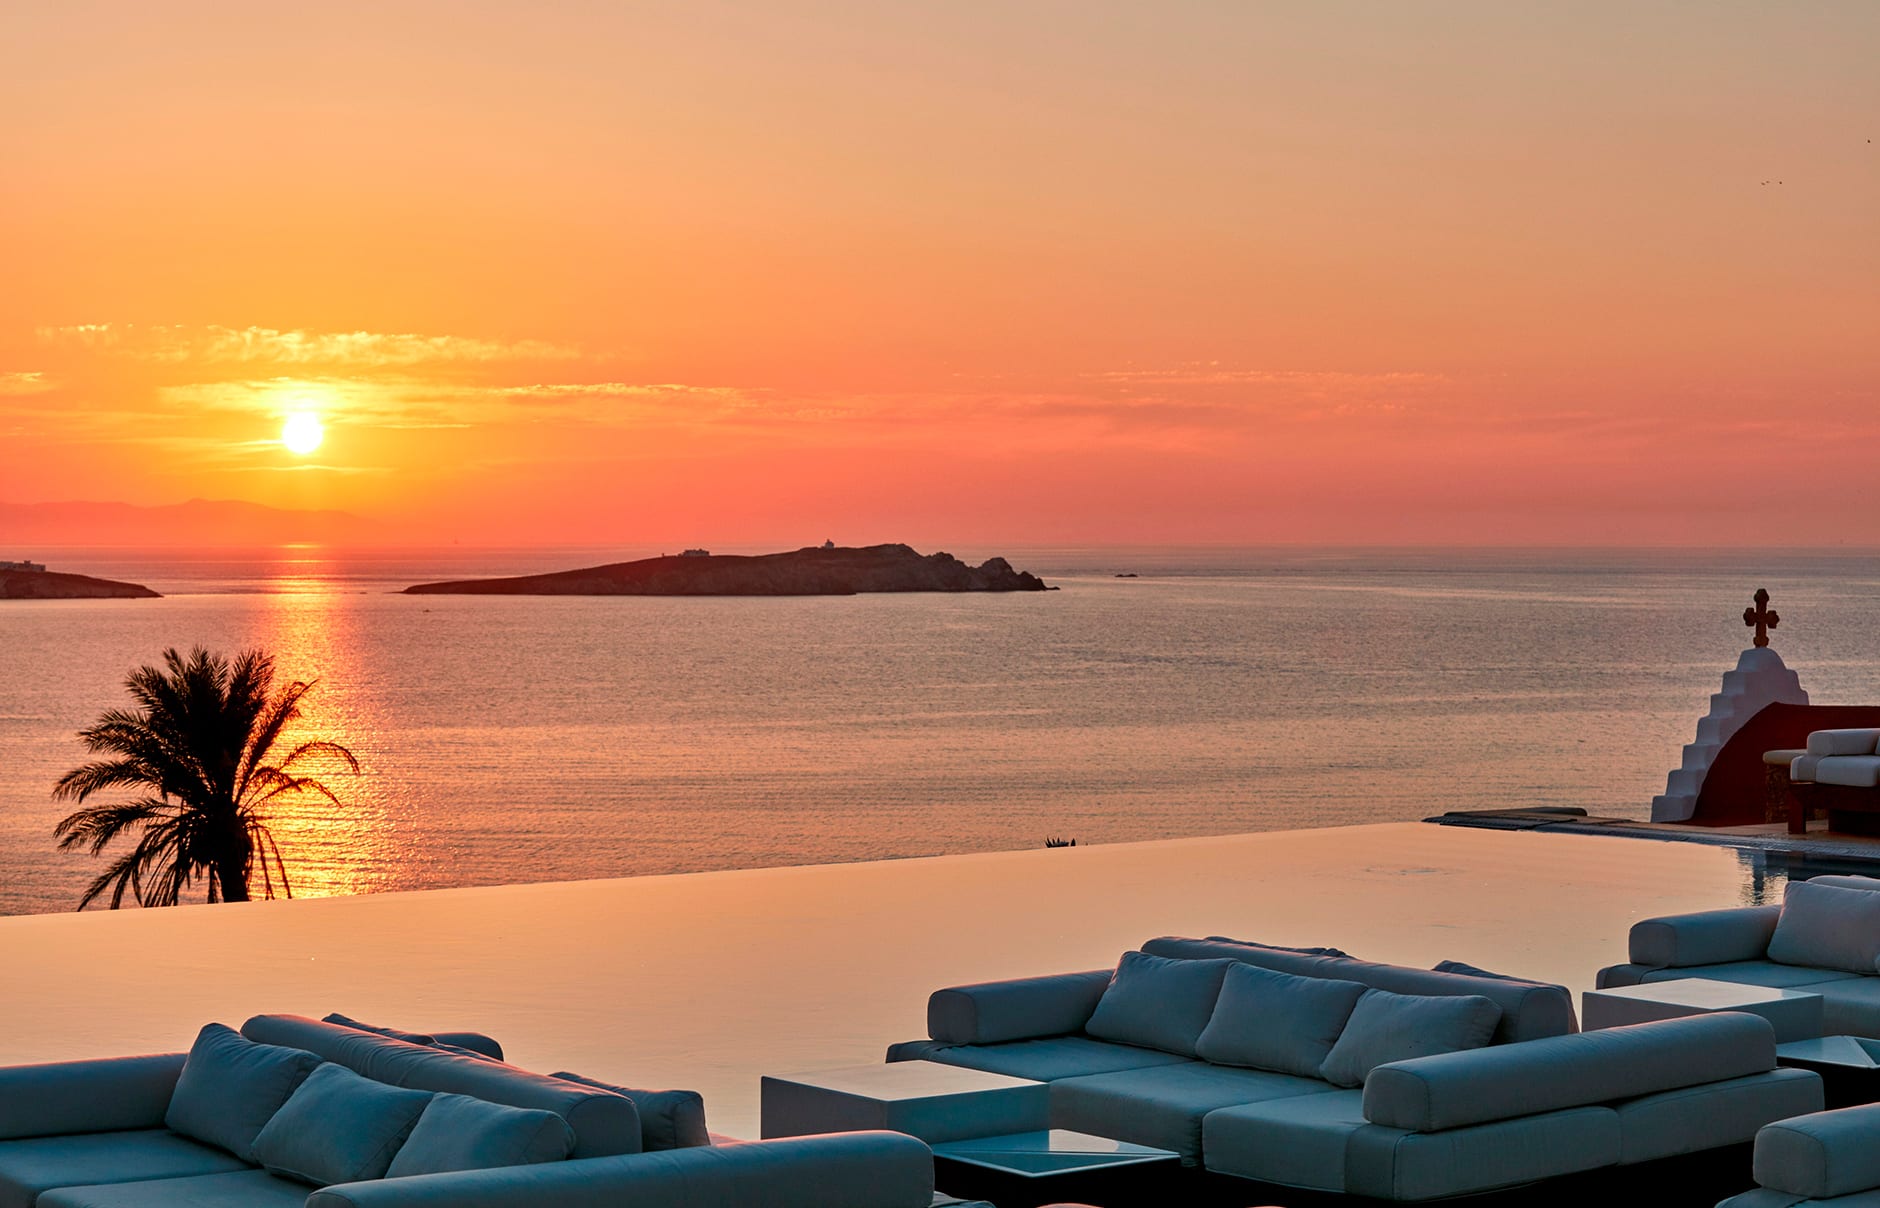 Bill & Coo Mykonos, Greece. Hotel Review by TravelPlusStyle. Photo © Bill & Coo Mykonos